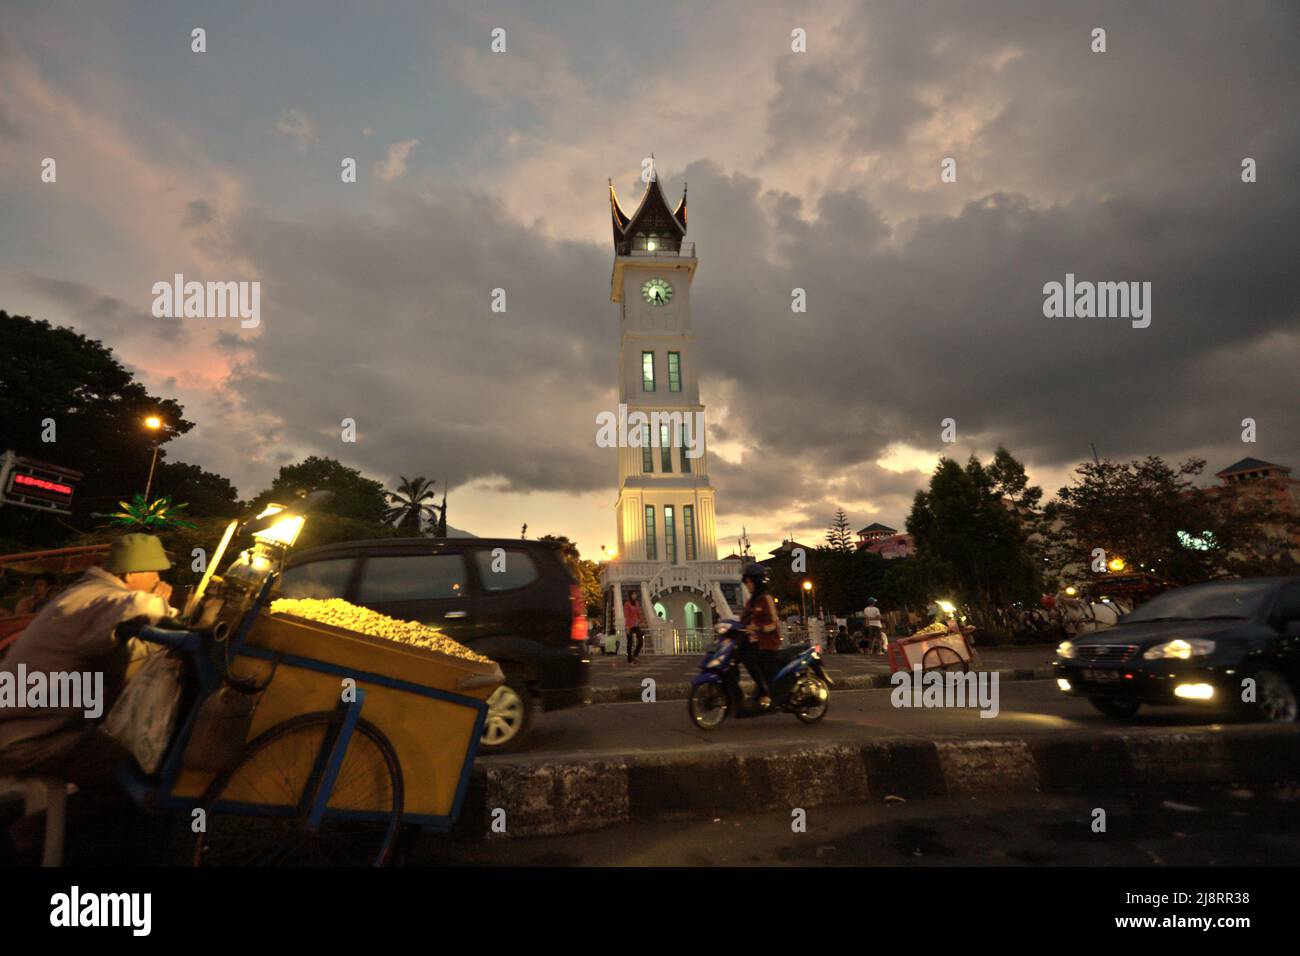 Steamed peanuts vendor and road traffic in a background of big clock tower known locally as Jam Gadang, a major landmark in Bukittinggi, West Sumatra, Indonesia. Stock Photo